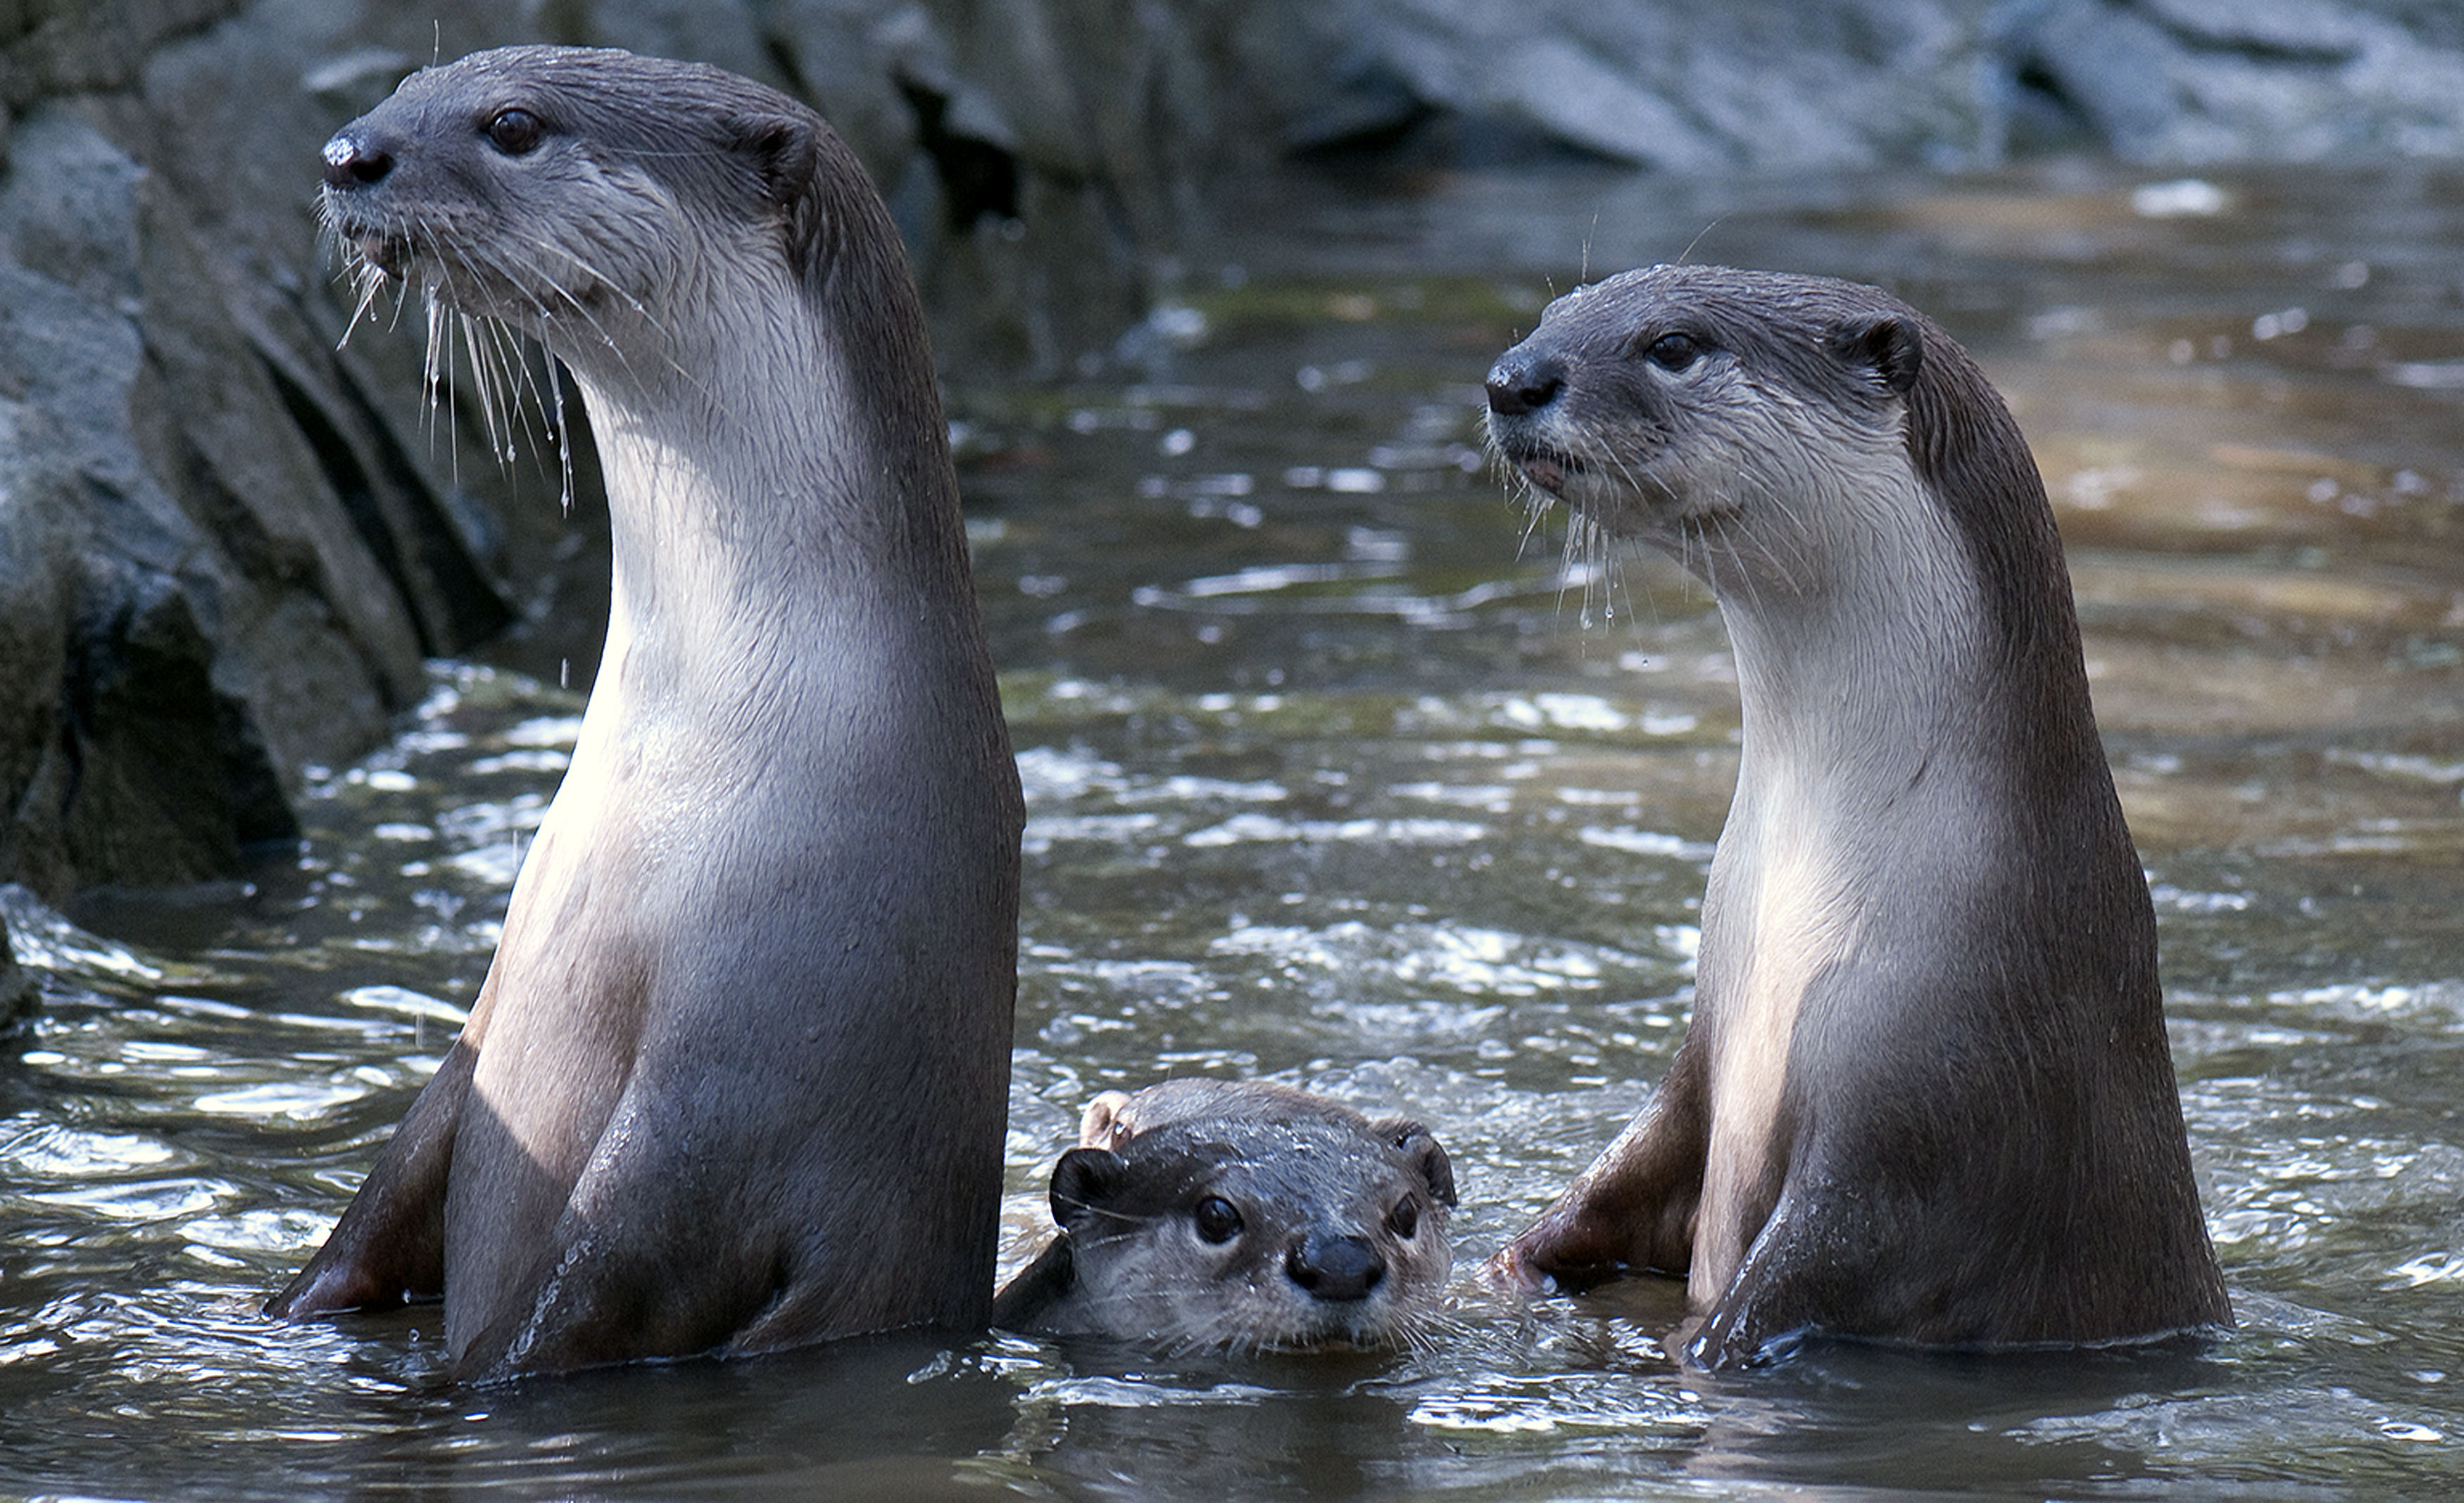 Smooth-coated otters